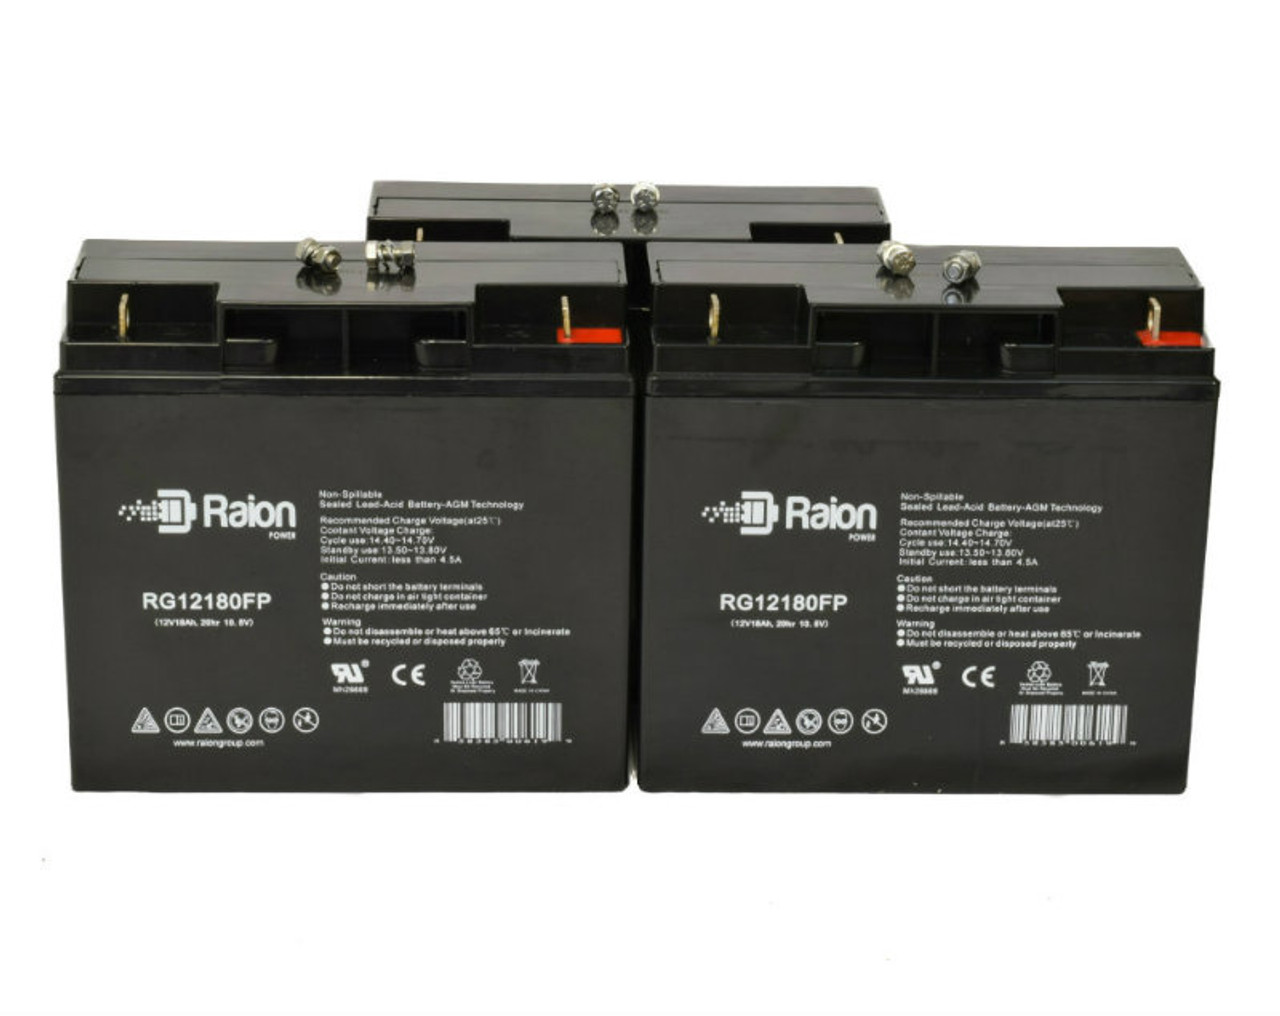 Raion Power Replacement 12V 18Ah Battery for Chilwee 6-FM-17 - 3 Pack